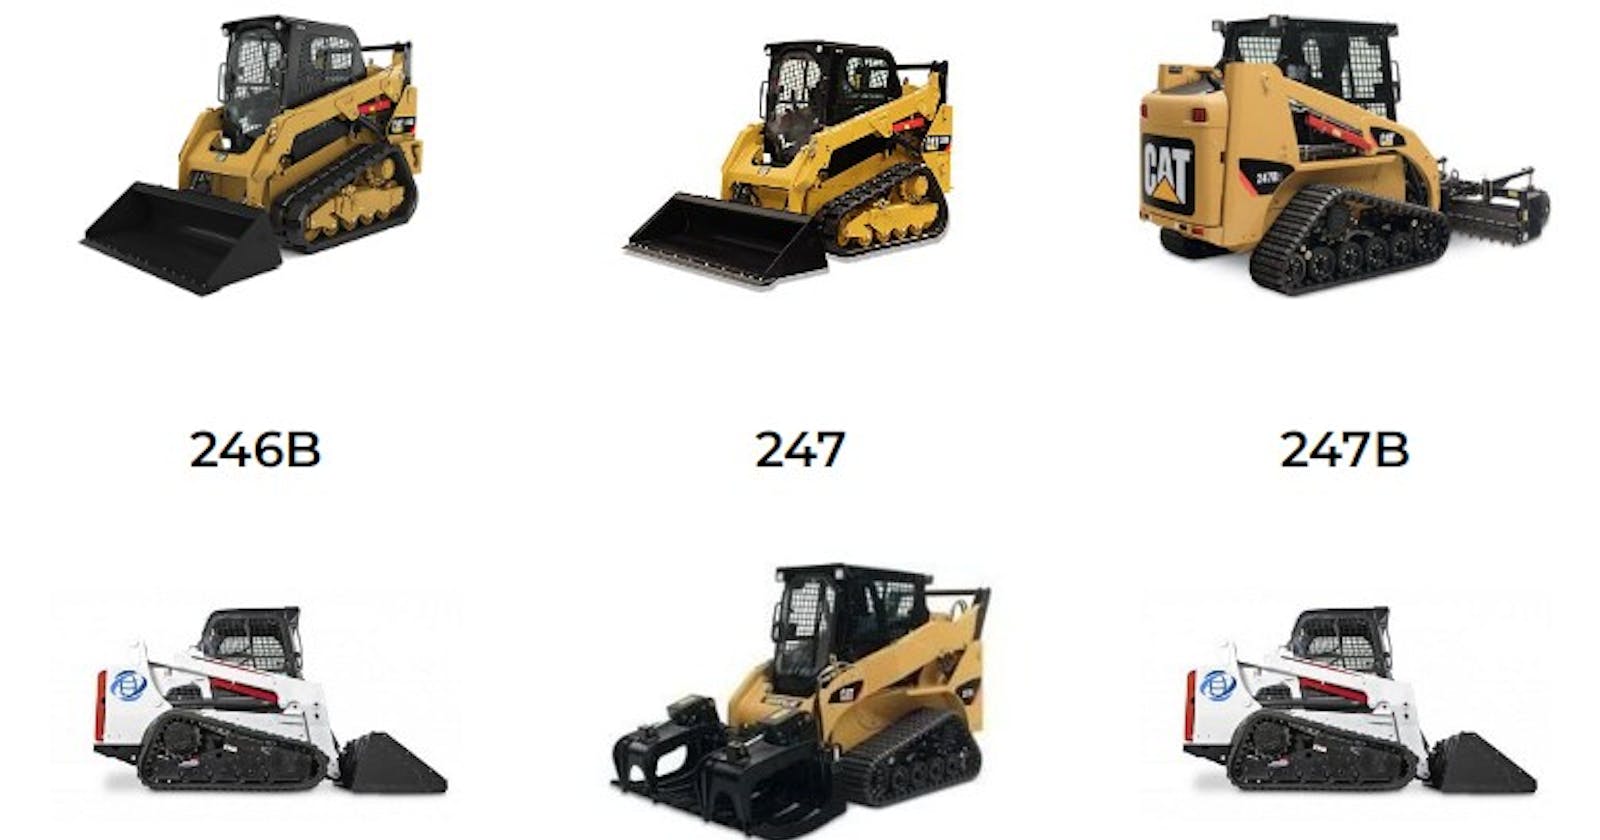 Where are Caterpillar Compact Track Loaders Made?